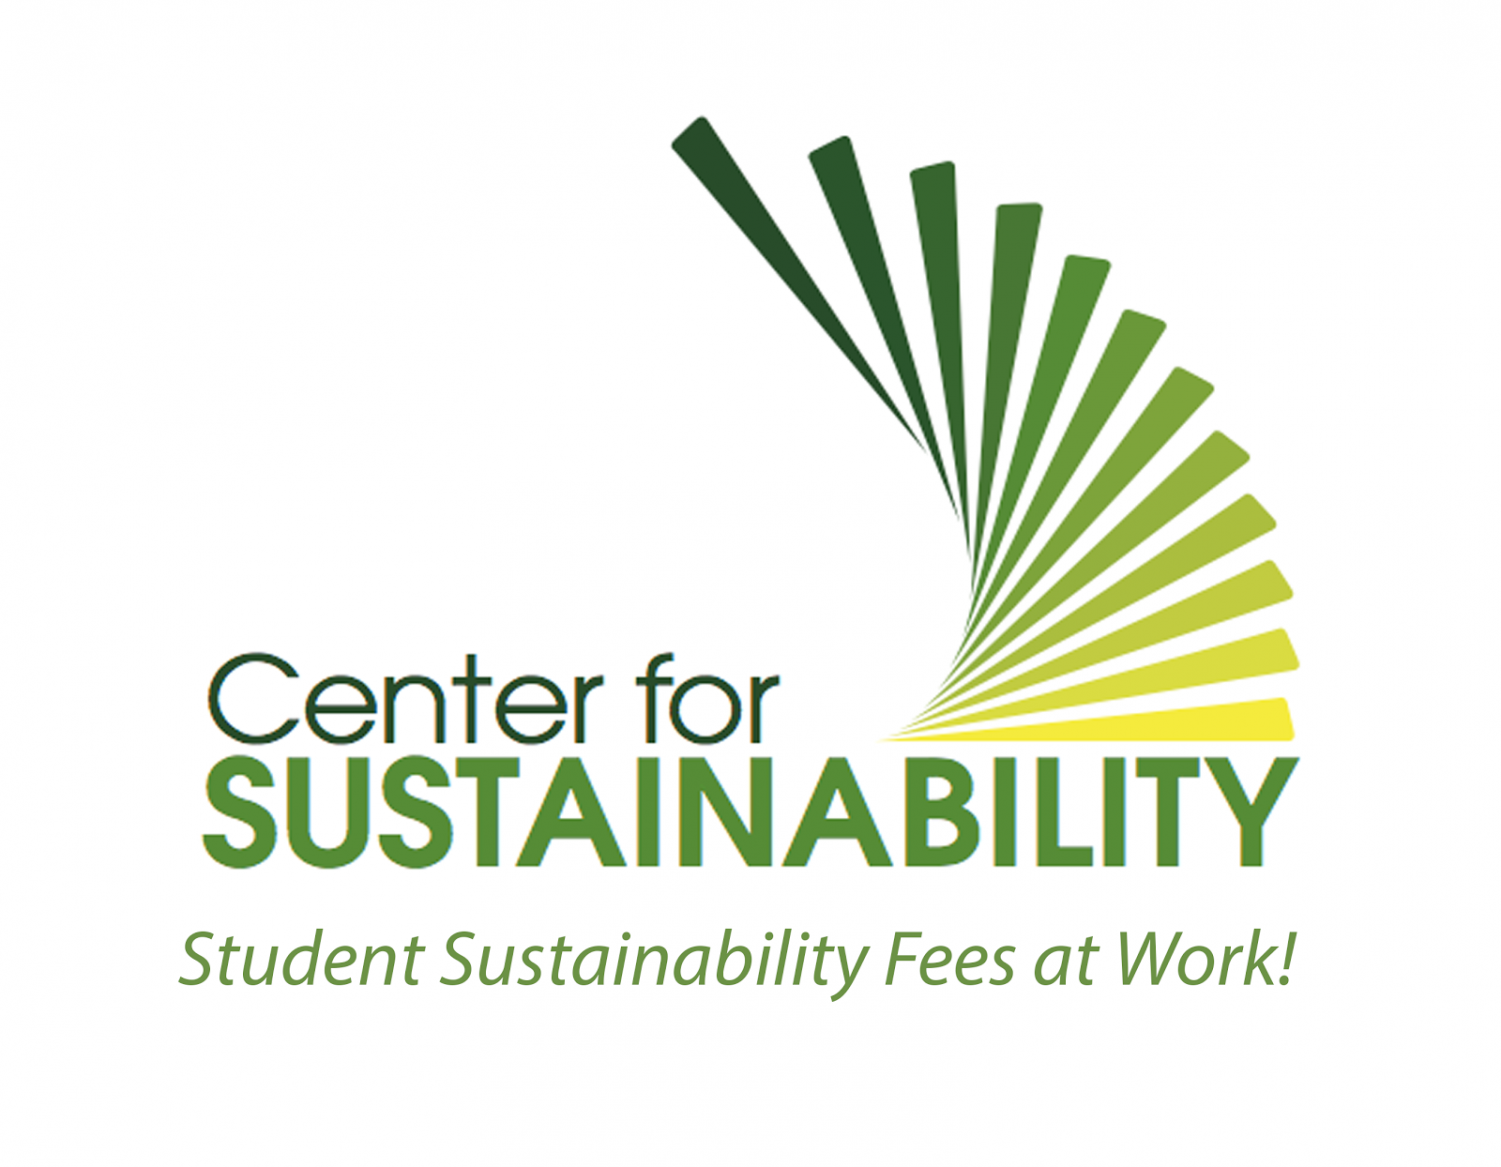 Center+for+Sustainability+offers+fee+grants+for+sustainable+projects